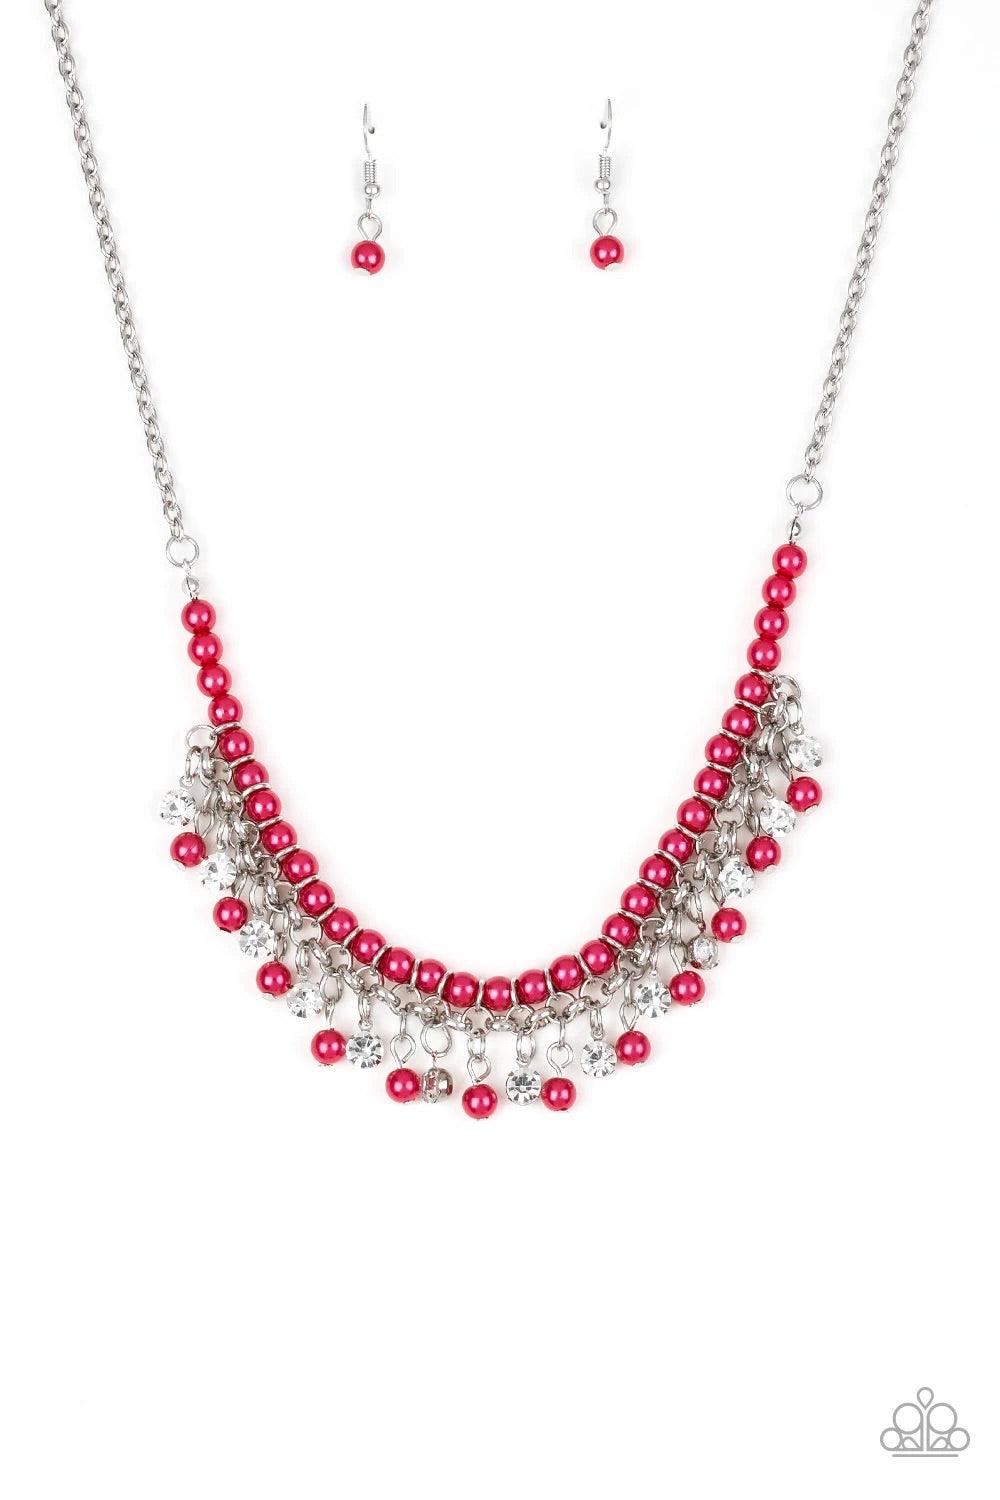 Paparazzi Accessories A Touch of CLASSY - Pink Infused with silver chain, vivacious pink pearls are threaded along an invisible wire below the collar. Matching pink pearls and glittery white rhinestones swing from the pearly strand, creating a flirtatious